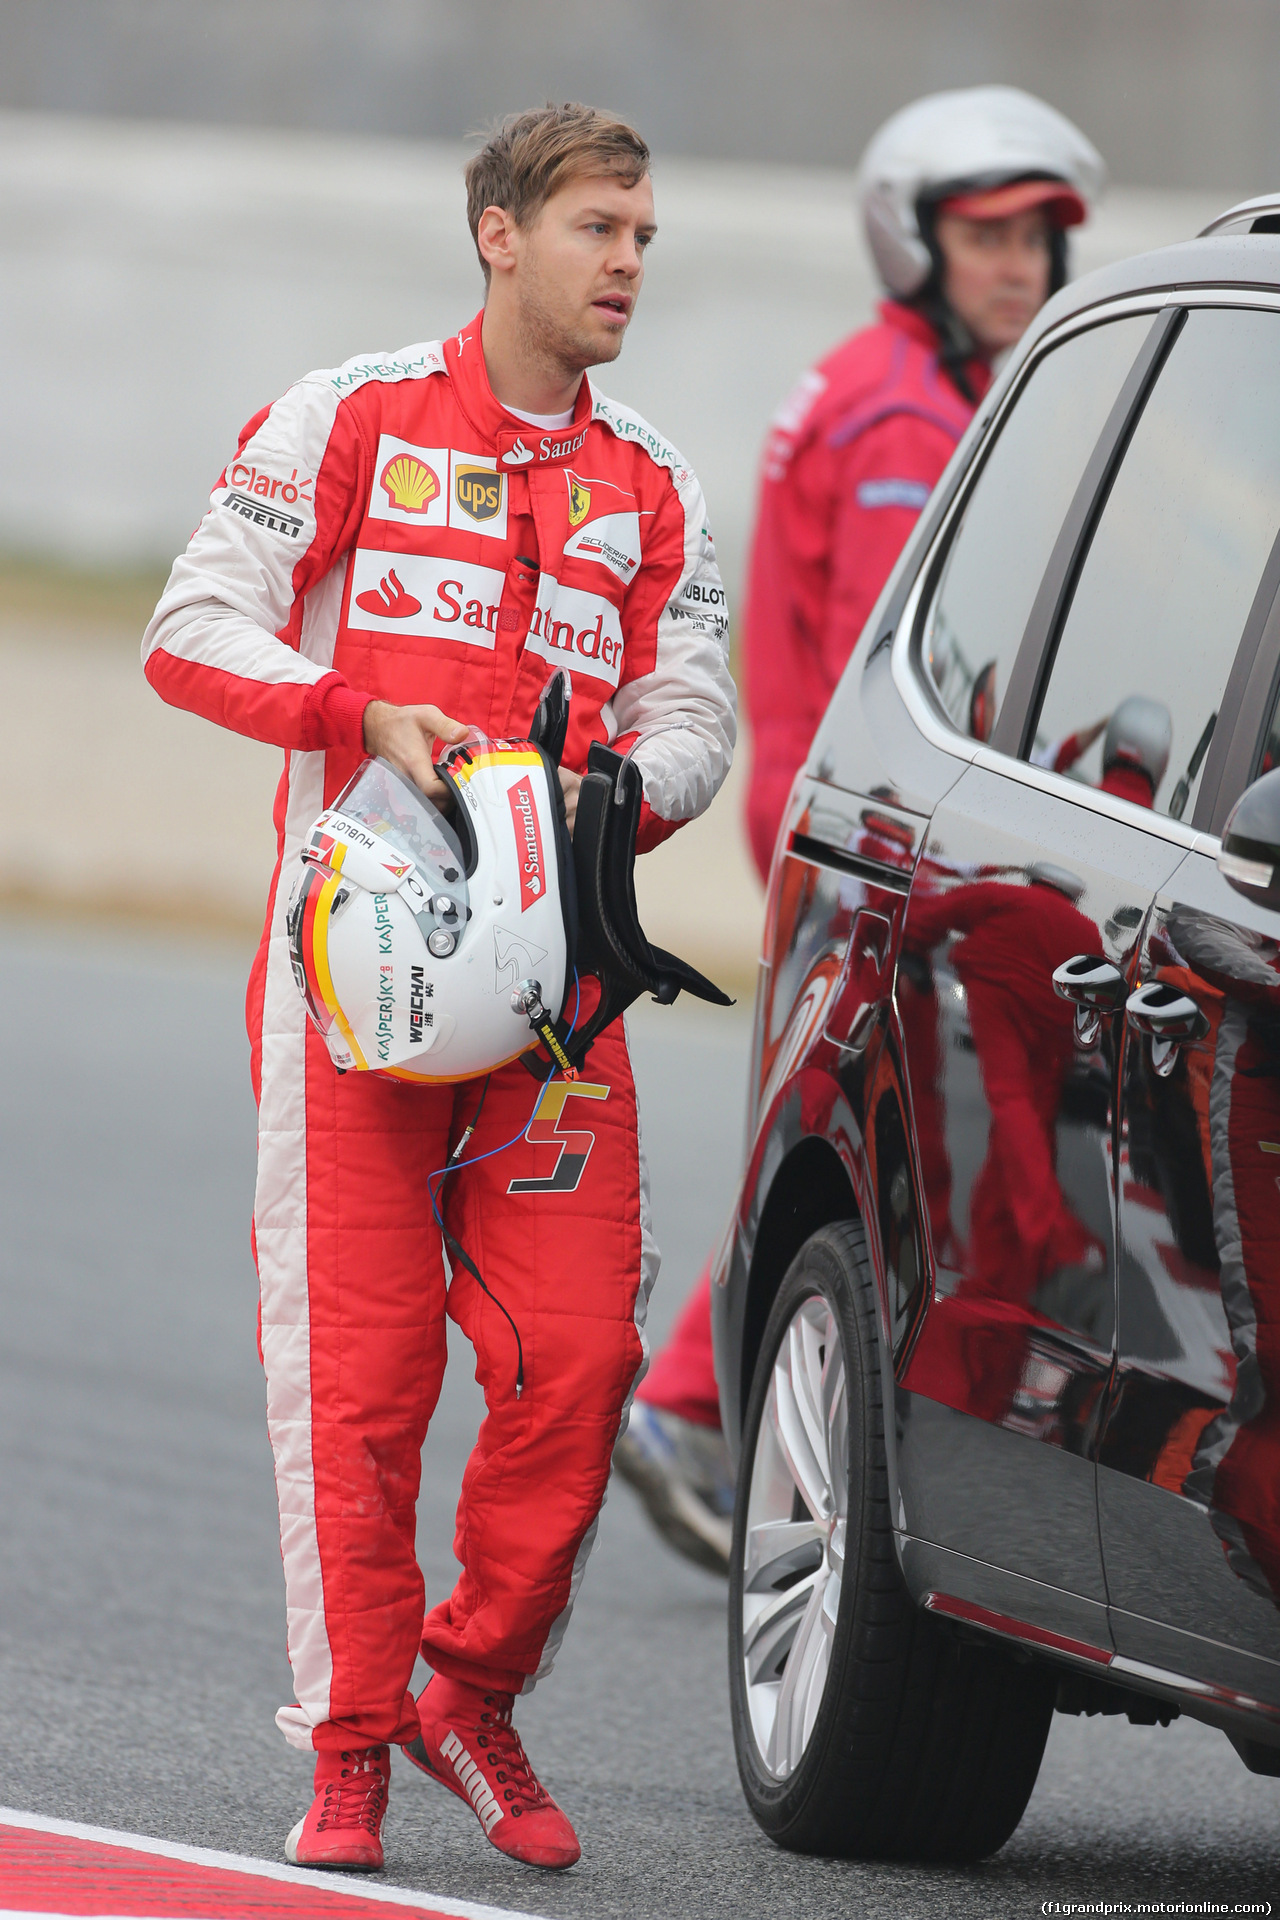 TEST F1 BARCELLONA 21 FEBBRAIO, Sebastian Vettel (GER) Ferrari returns to the pits after spinning off the circuit.
21.02.2015.